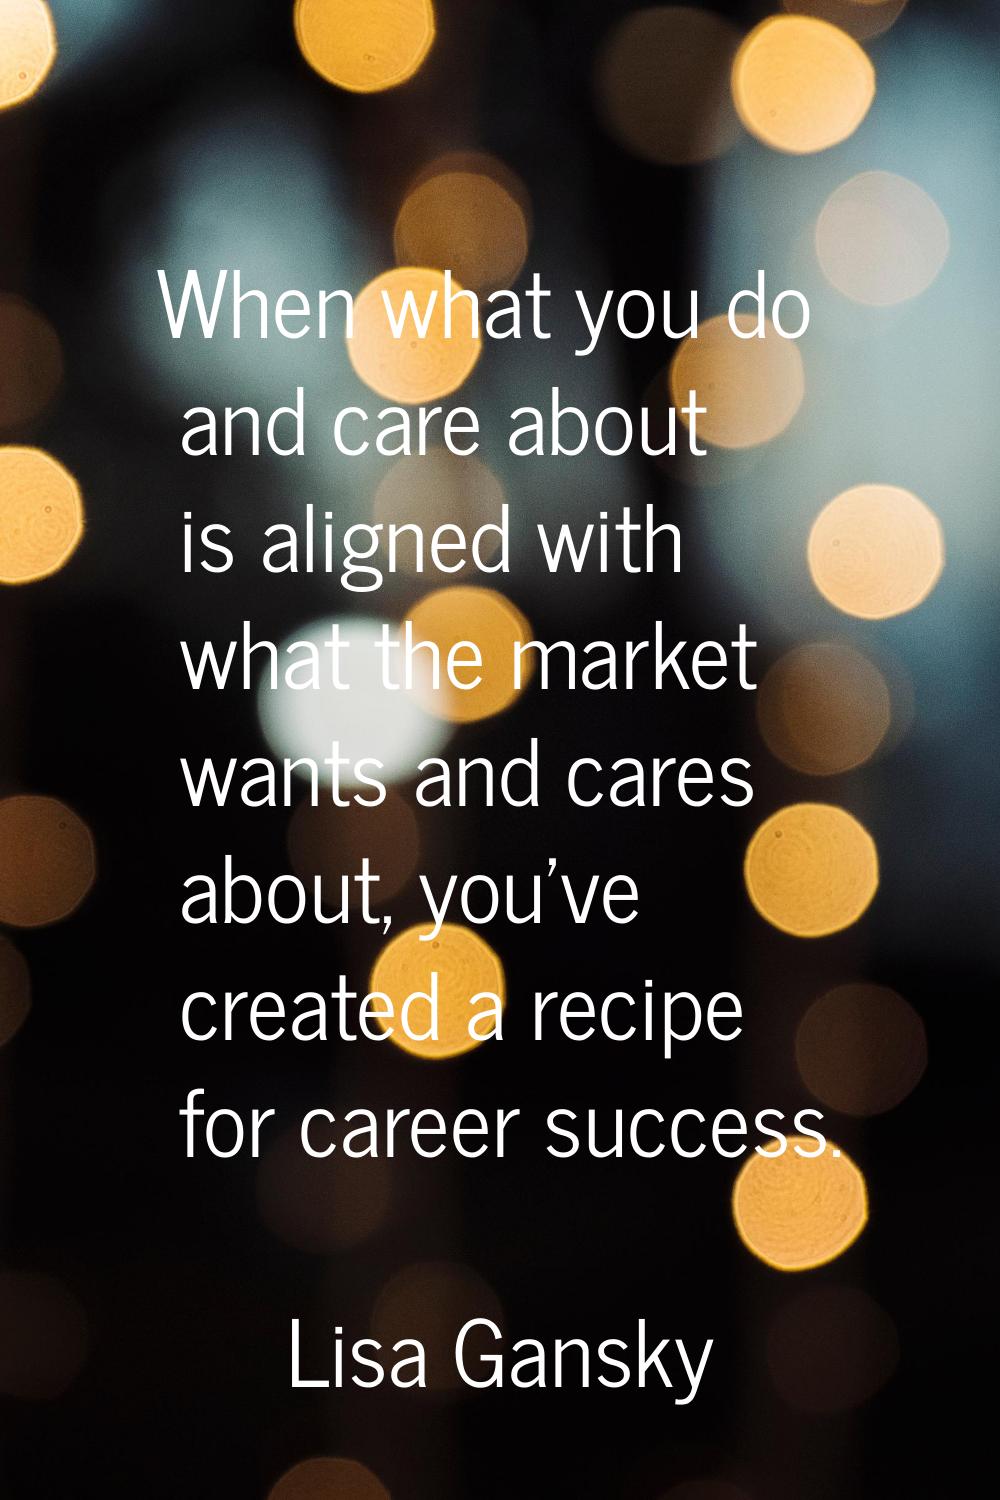 When what you do and care about is aligned with what the market wants and cares about, you've creat